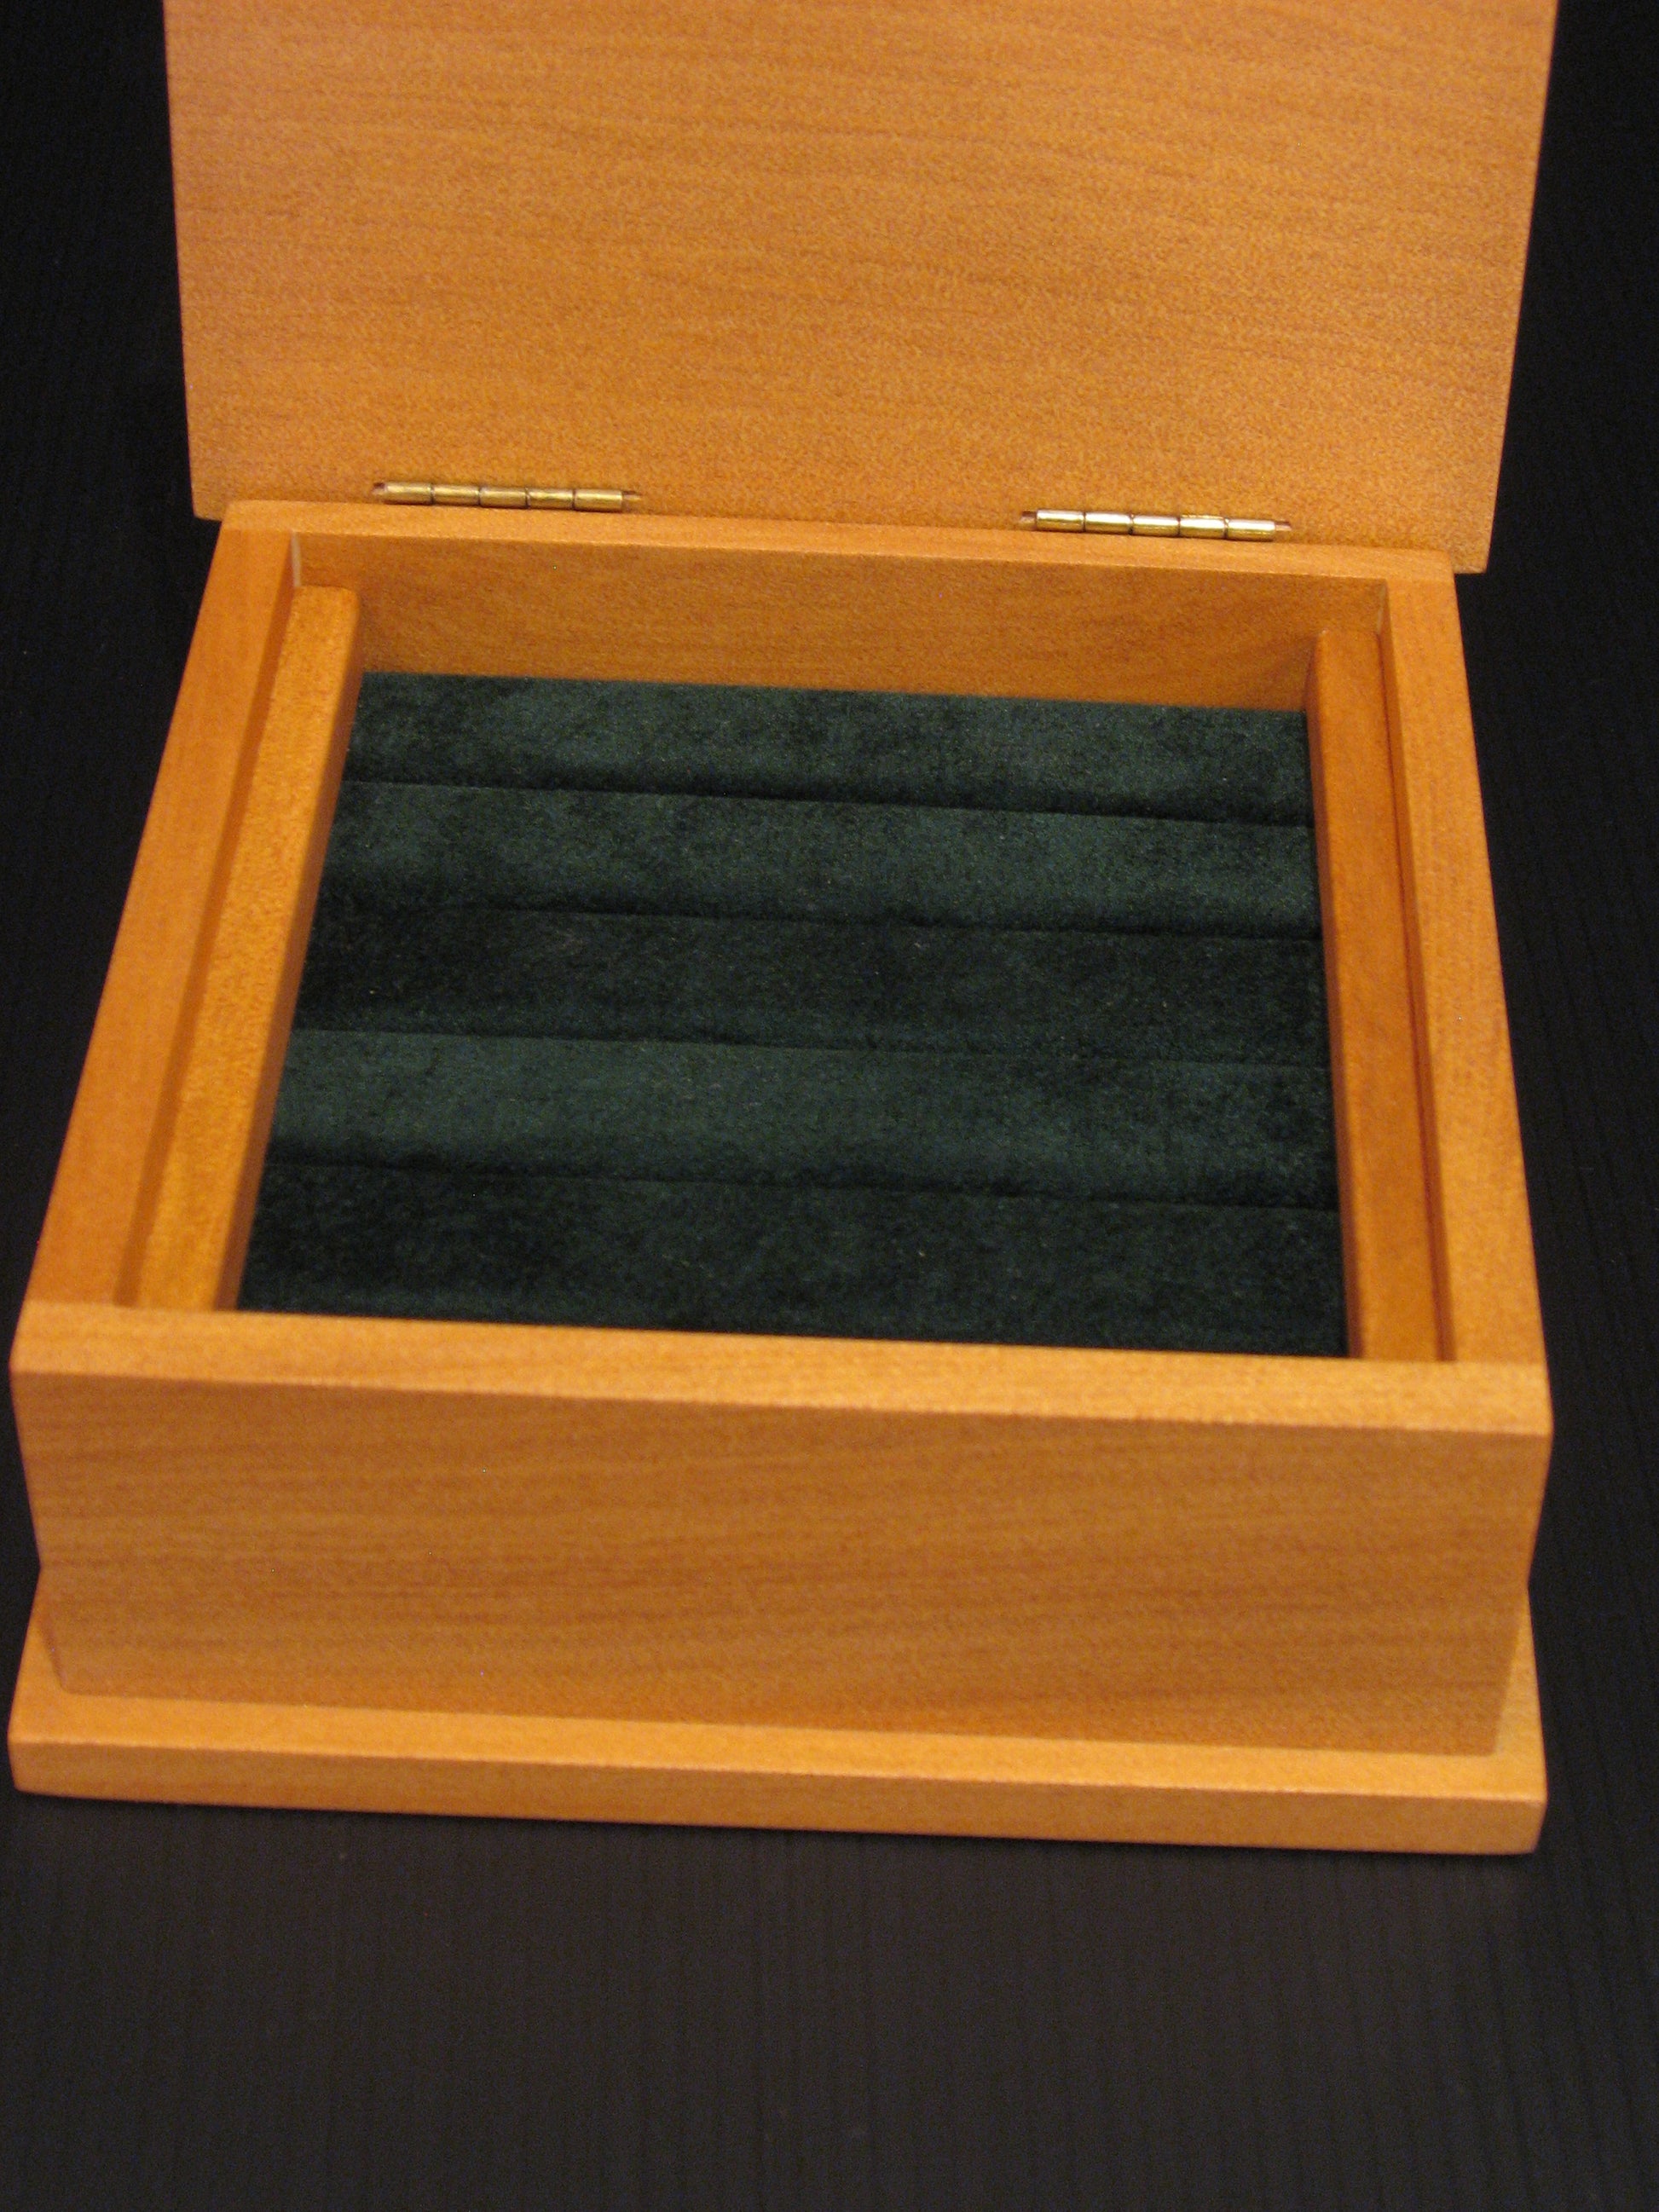 Interior of Wooden Cufflink or Earring Box by Timber Arts Silver Fern Gallery